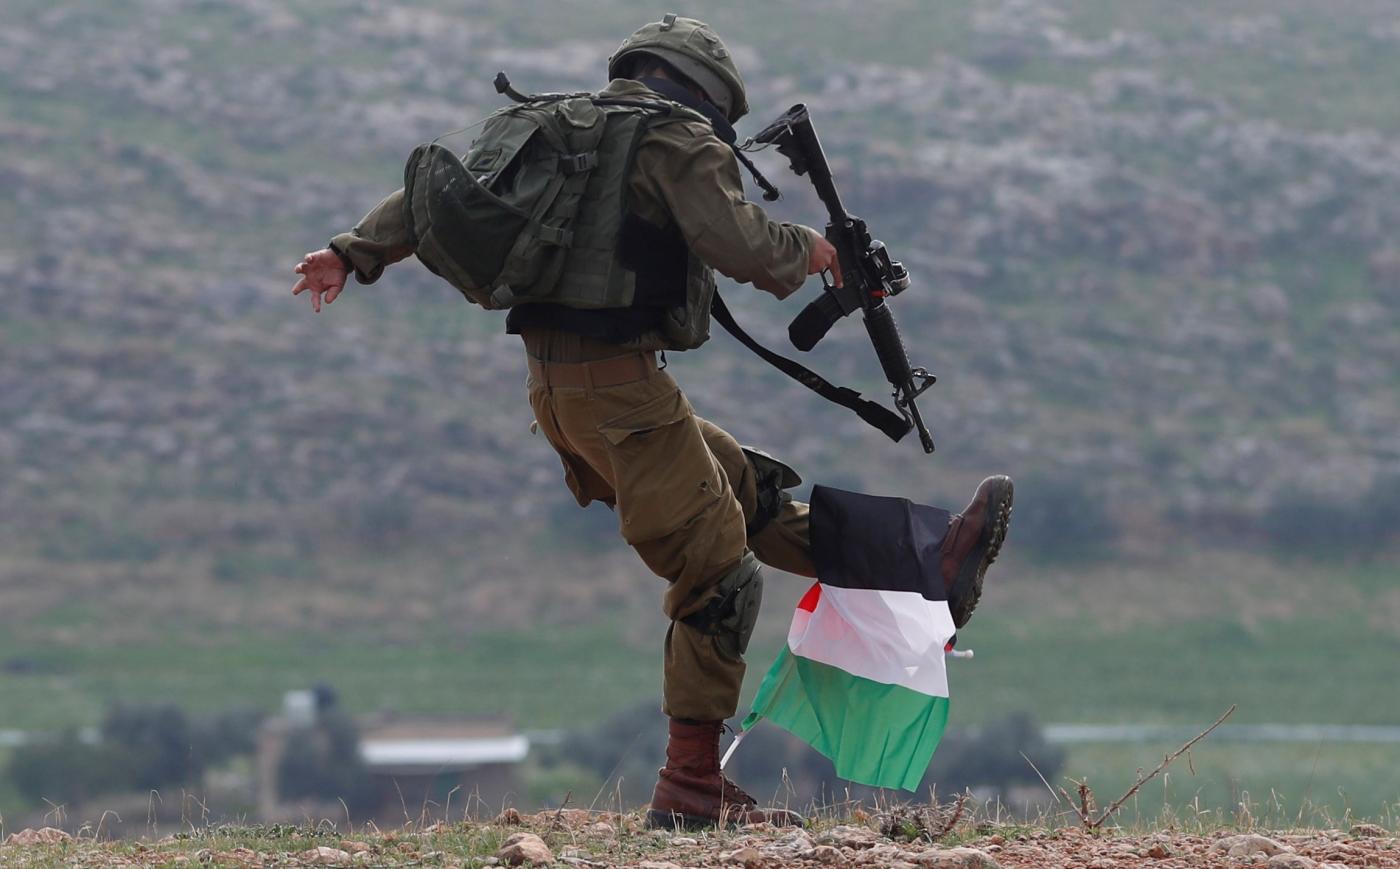 An Israeli soldier kicks a Palestinian flag during a protest against US President Donald Trump’s Middle East ‘peace plan’ in the occupied West Bank on 29 January (Reuters)